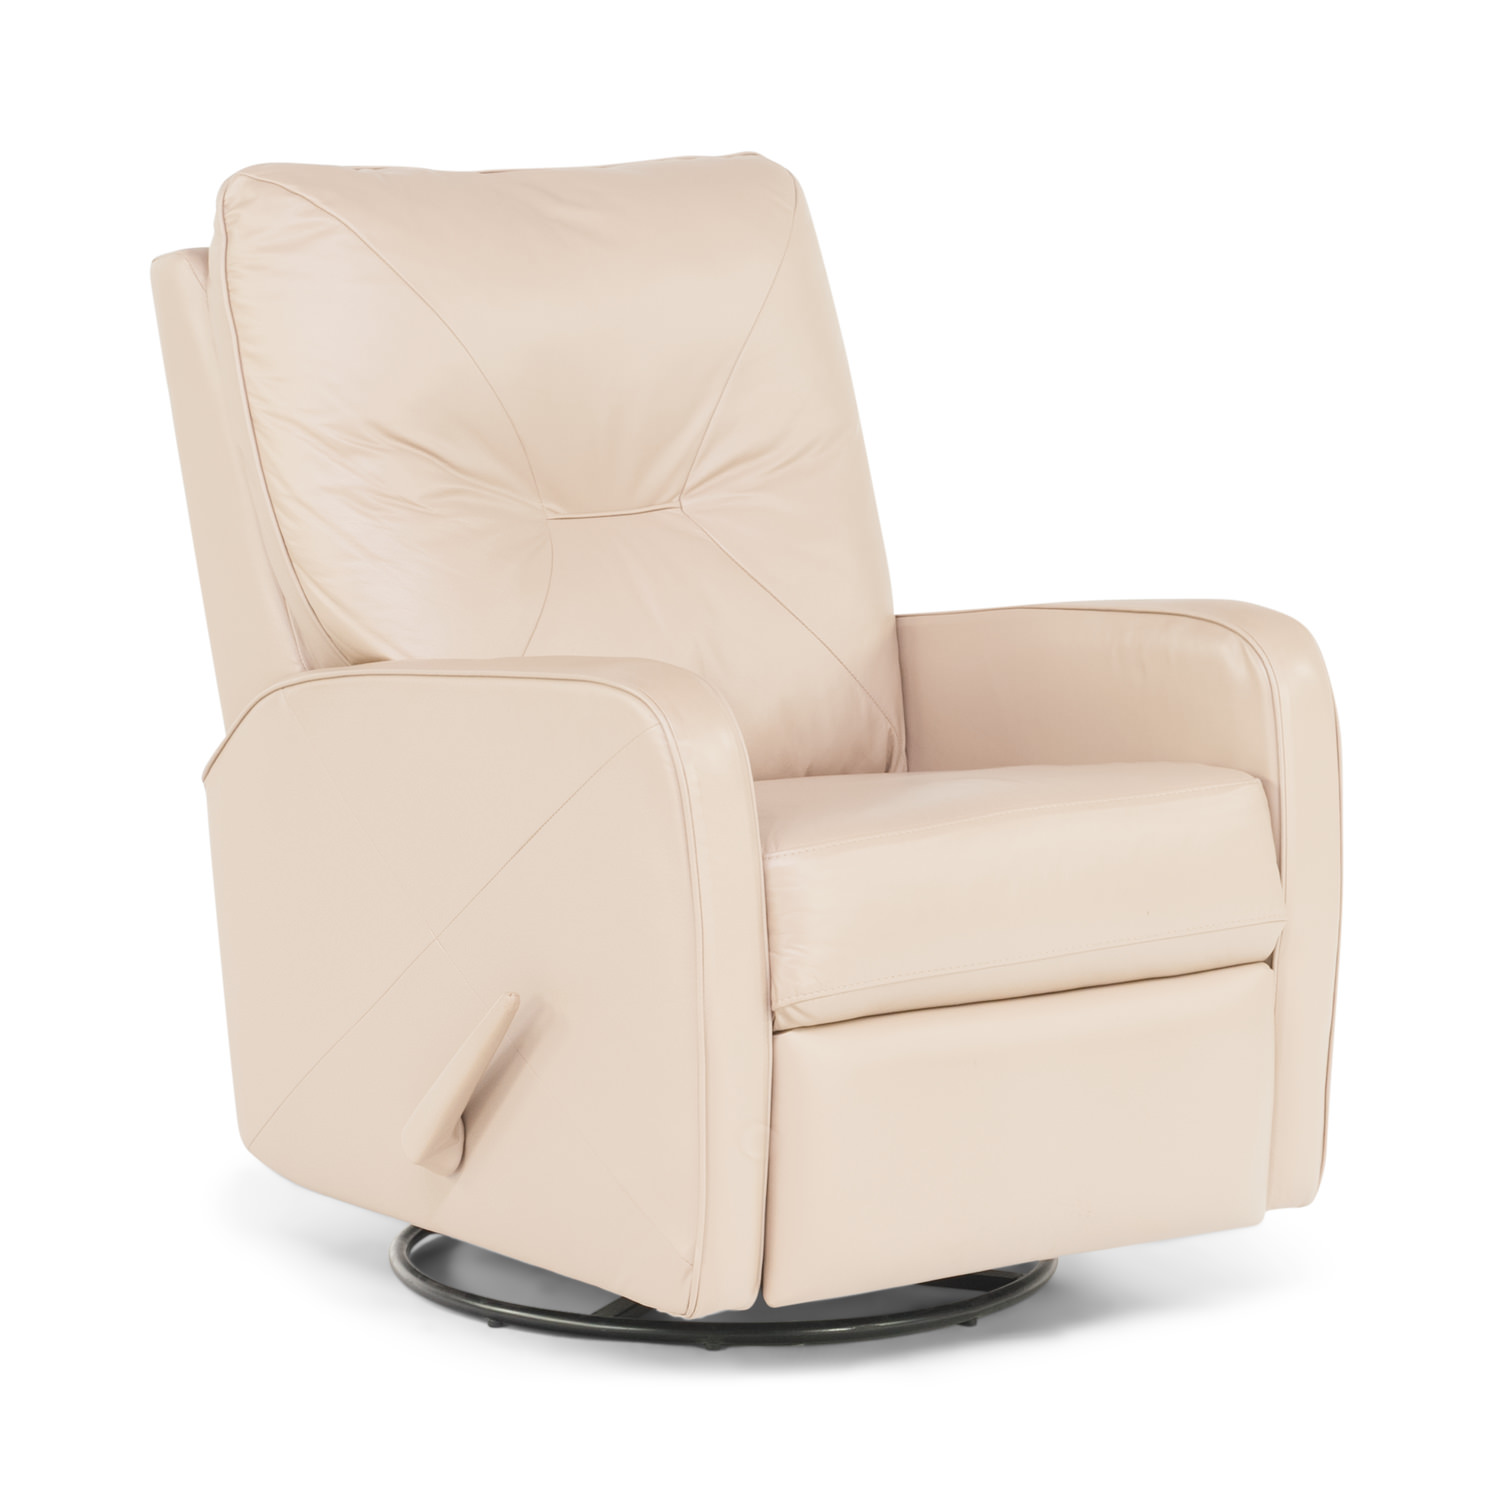 Lift Chairs That Rock And Swivel | Swivel Chairs